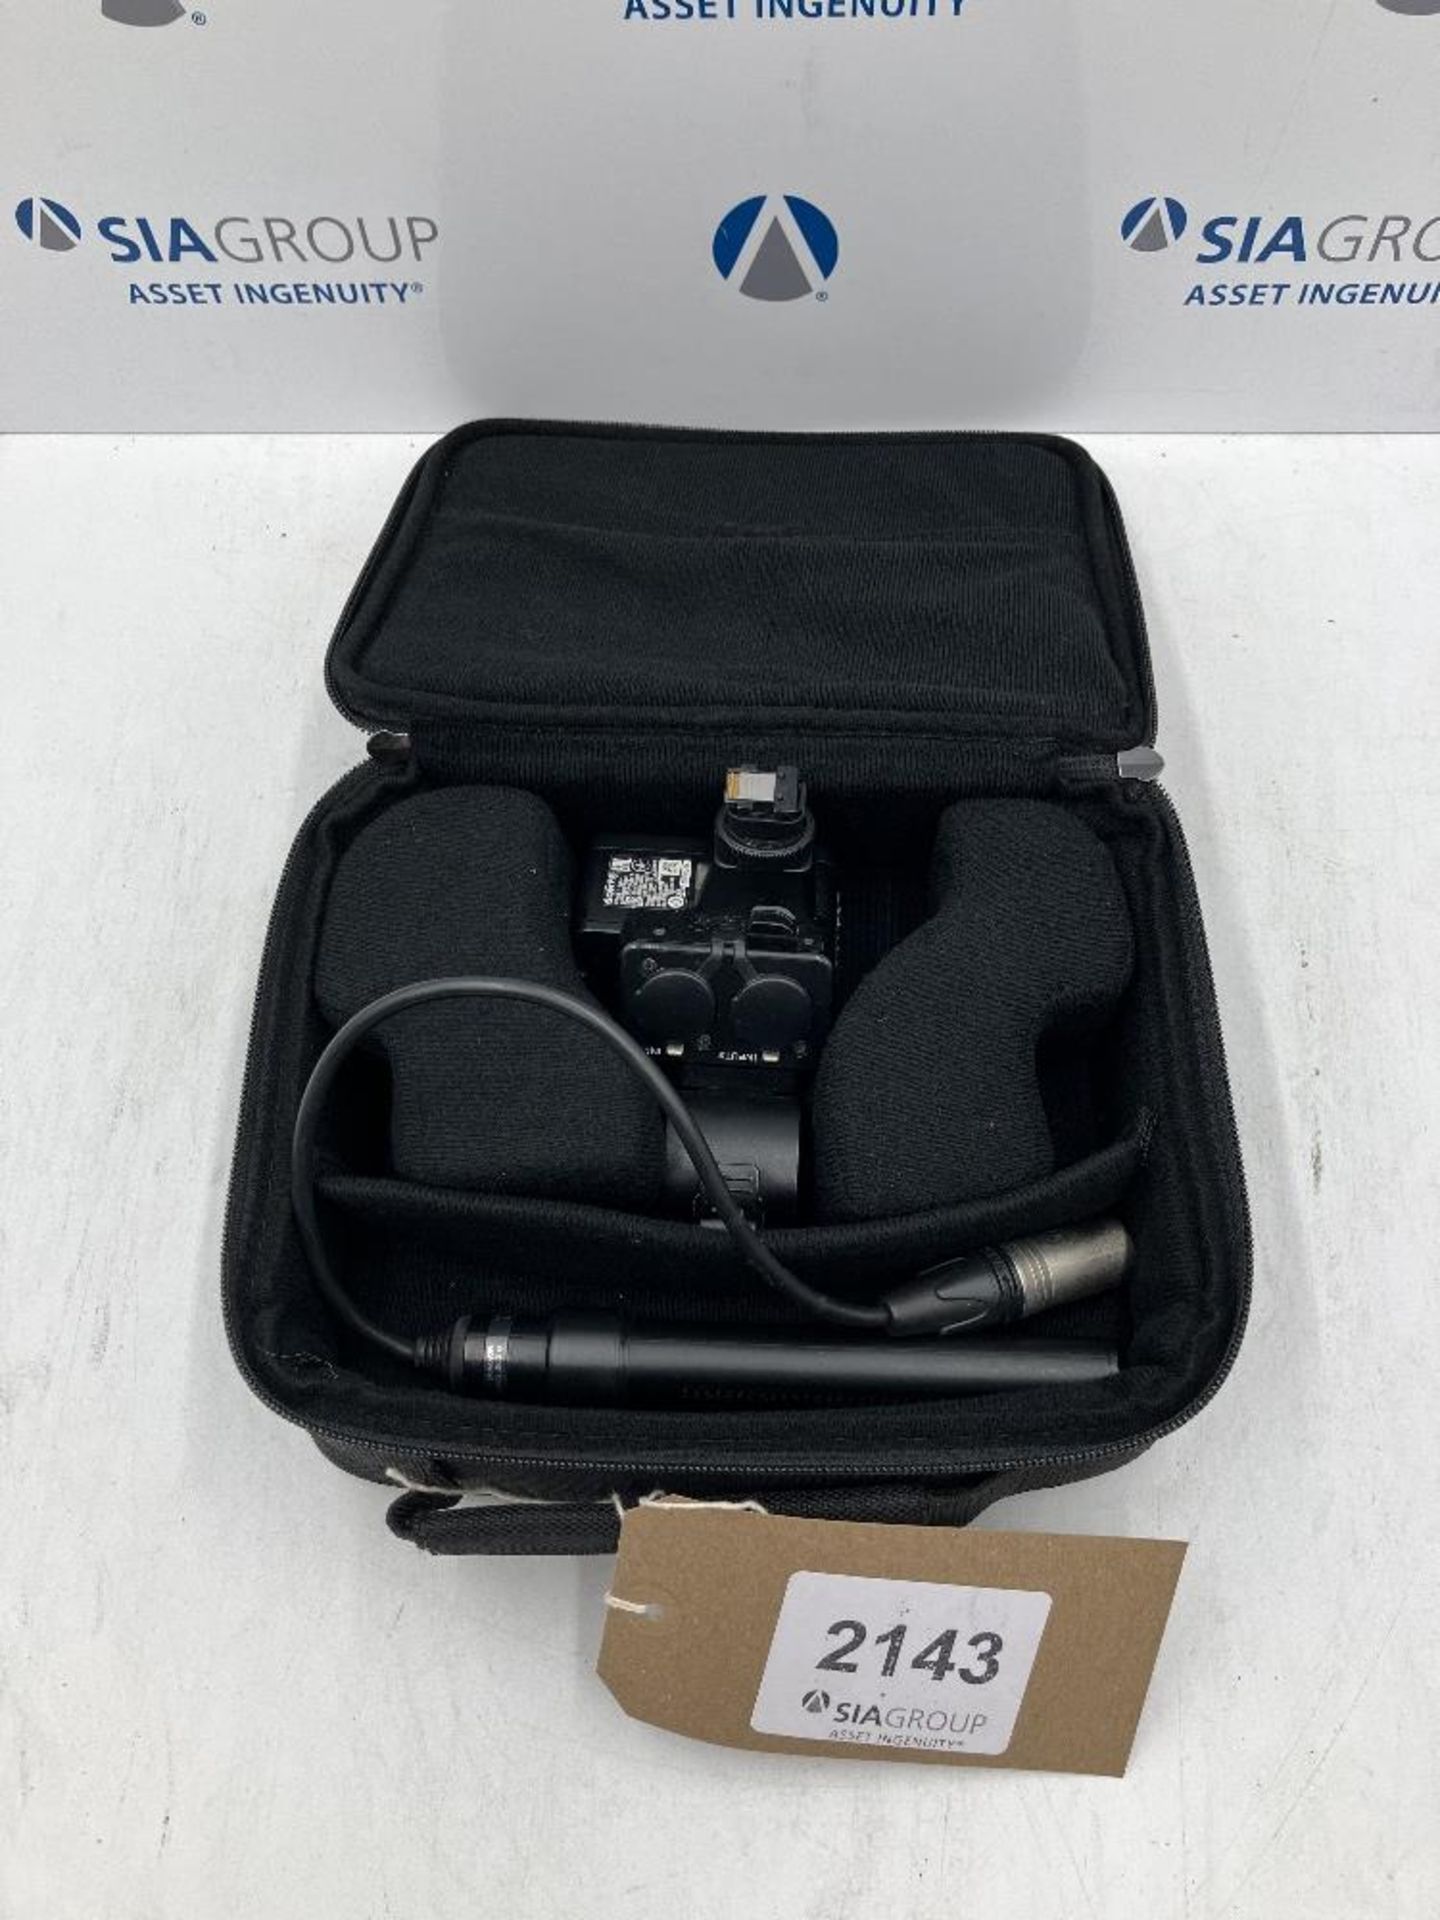 Sony XLR-A2M Audio Adaptor with Sony Microphone - Image 2 of 7